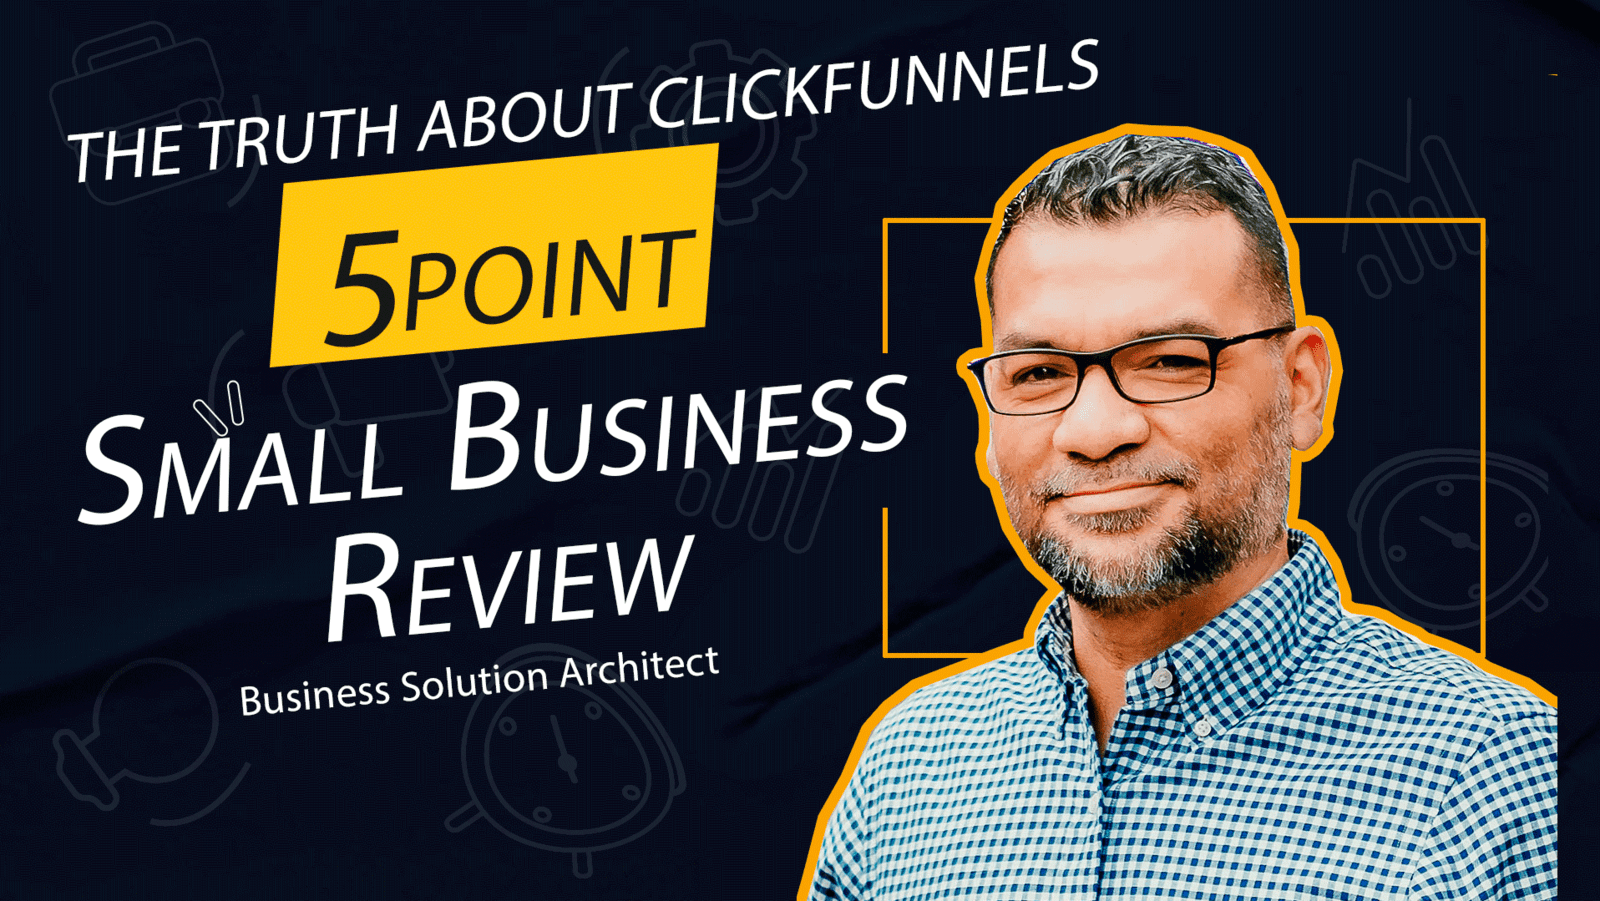 The Truth About ClickFunnels: A Review for Small Business Owners